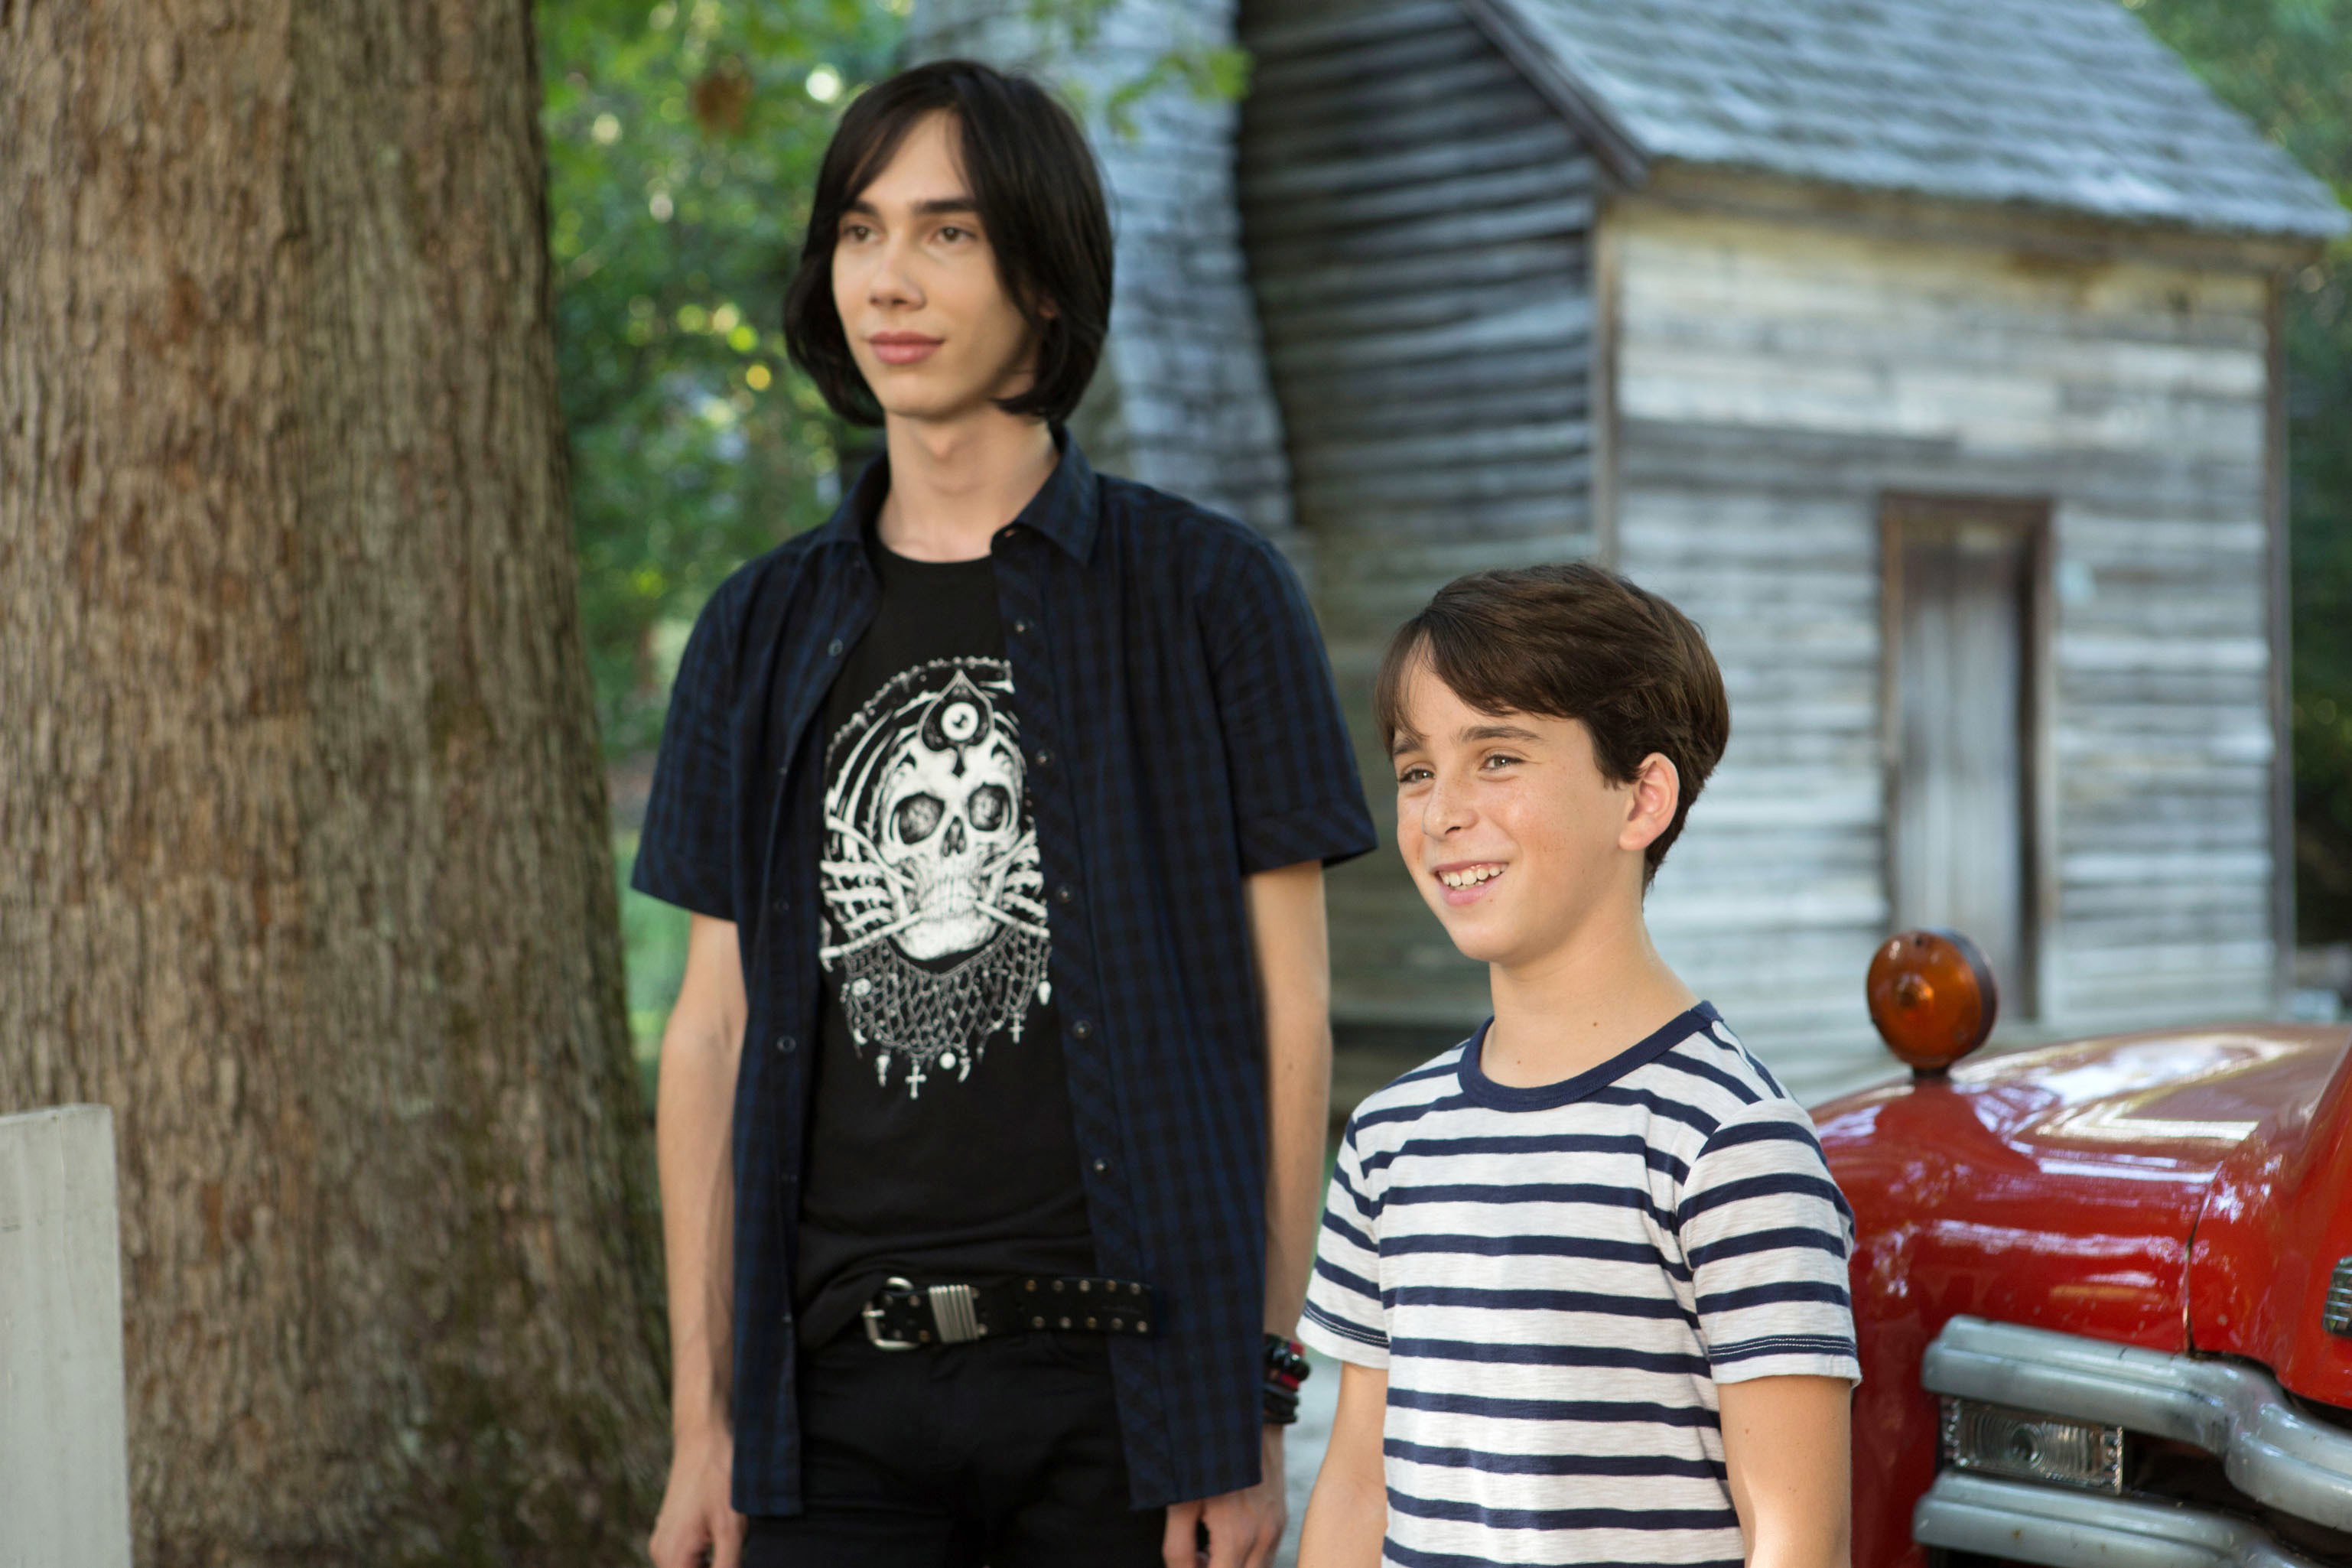 Charlie in a skull graphic T-shirt and Jason Drucker in a striped shirt, standing outside near a cabin in the movie